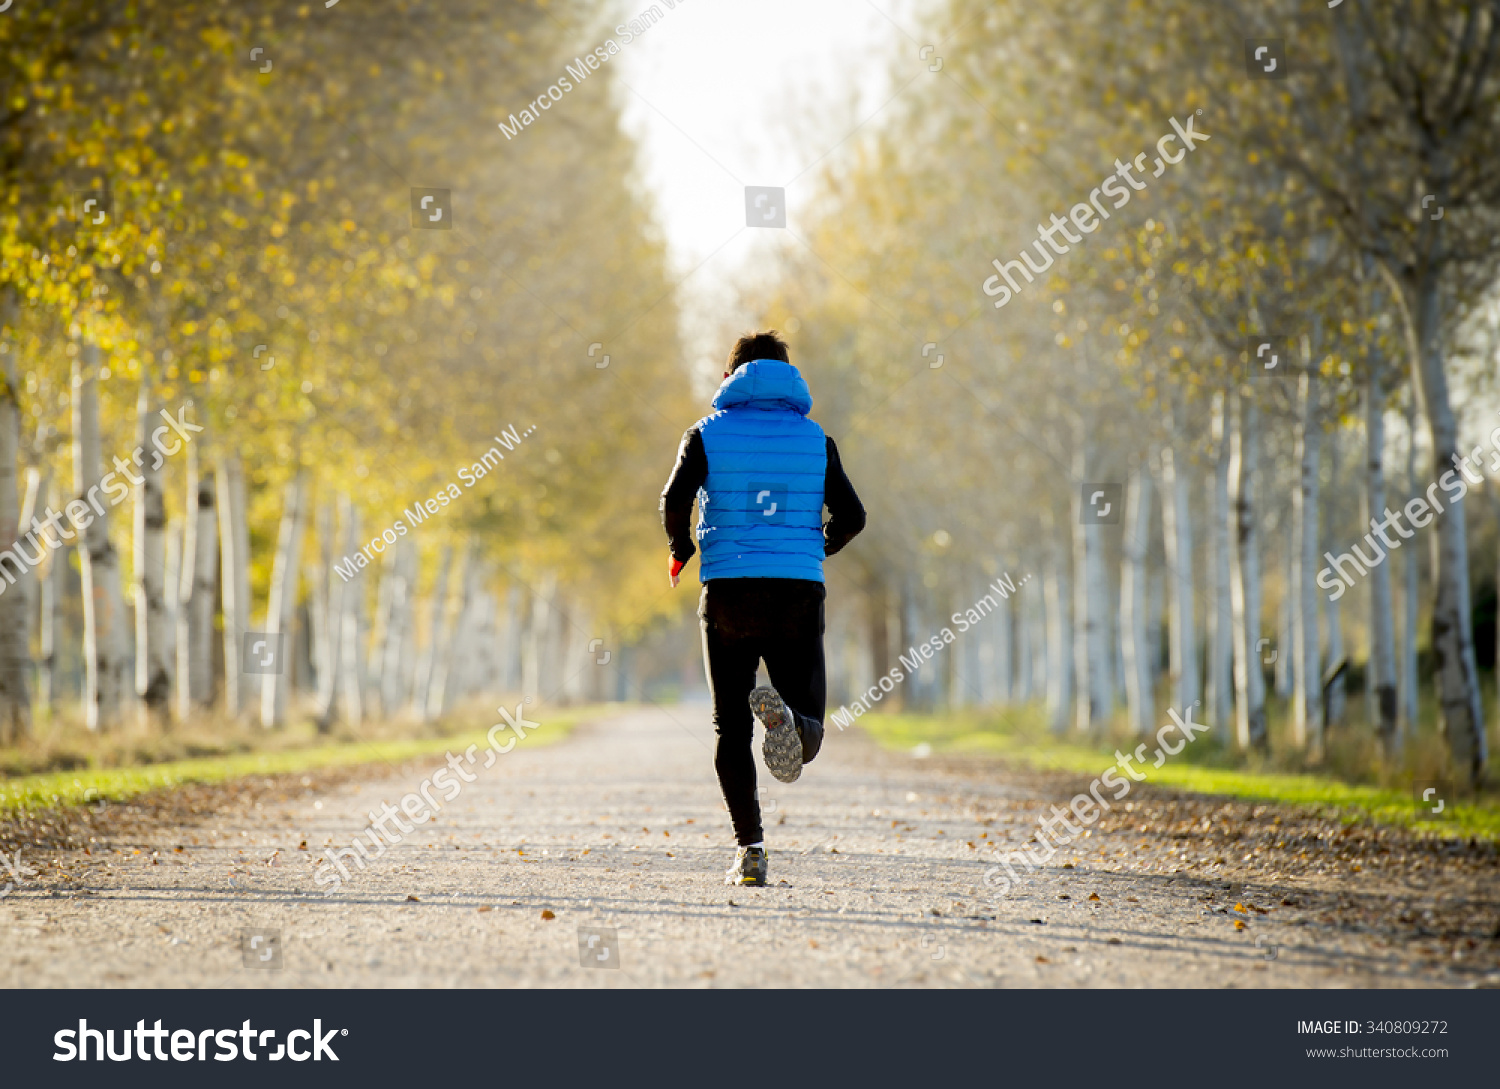 back view young sport man running outdoors in off road trail track with trees in Autumn sunlight wearing jogging vest and sunglasses in fitness, countryside training and healthy lifestyle concept #340809272